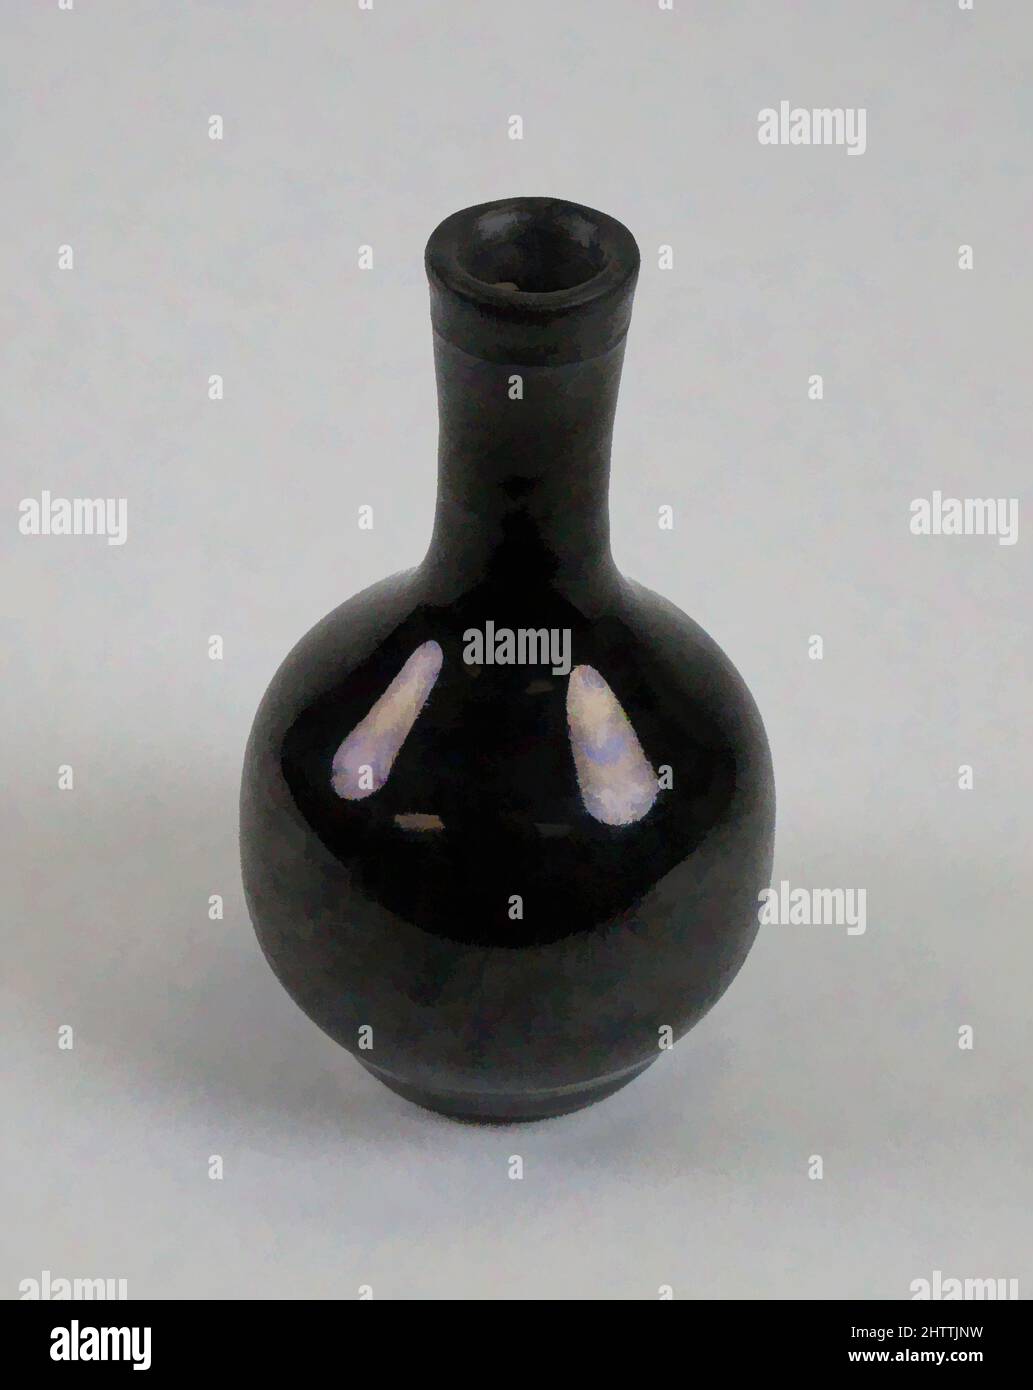 Art inspired by Vase, Qing dynasty (1644–1911), 19th century, China, Porcelain with mirror-black glaze (Wujin ware), H. 4 1/4 in. (10.8 cm), Ceramics, Classic works modernized by Artotop with a splash of modernity. Shapes, color and value, eye-catching visual impact on art. Emotions through freedom of artworks in a contemporary way. A timeless message pursuing a wildly creative new direction. Artists turning to the digital medium and creating the Artotop NFT Stock Photo